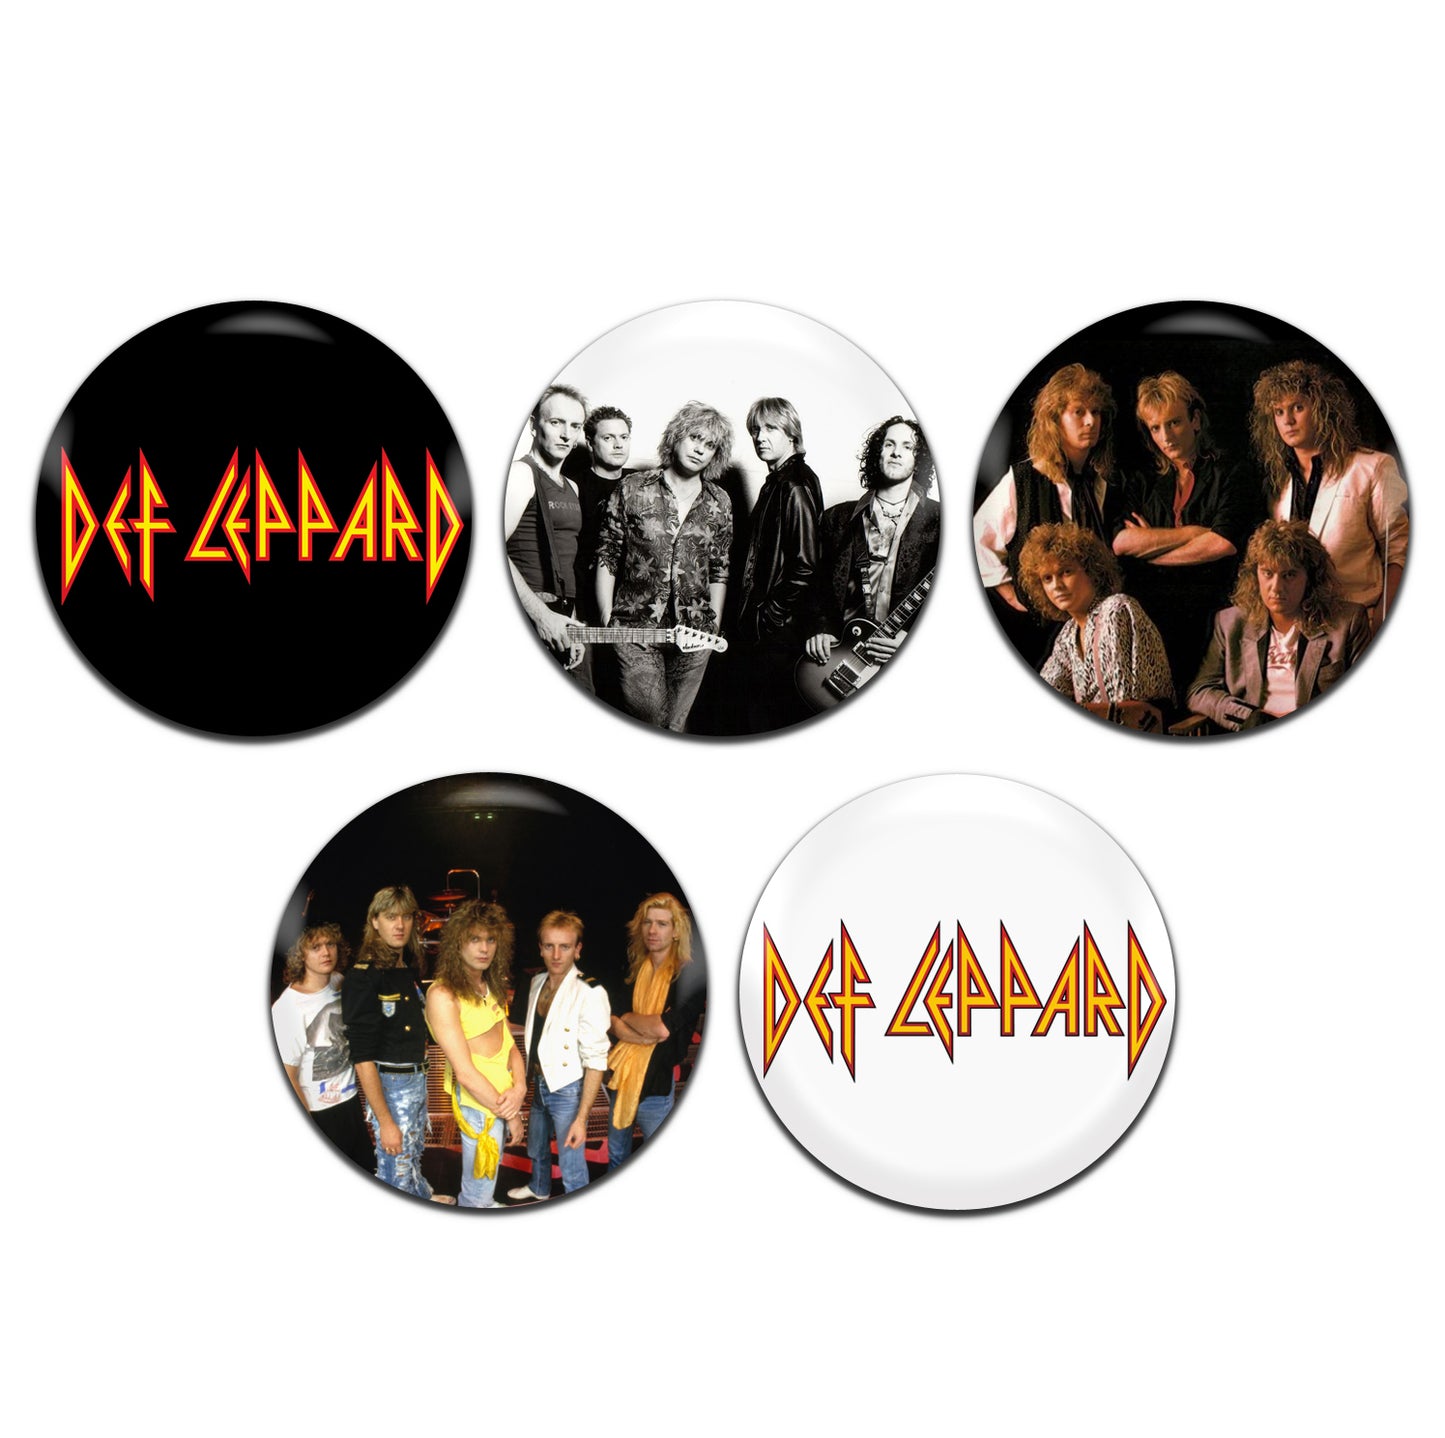 Def Leppard Heavy Rock Glam Metal Band 70's 80's 25mm / 1 Inch D-Pin Button Badges (5x Set)